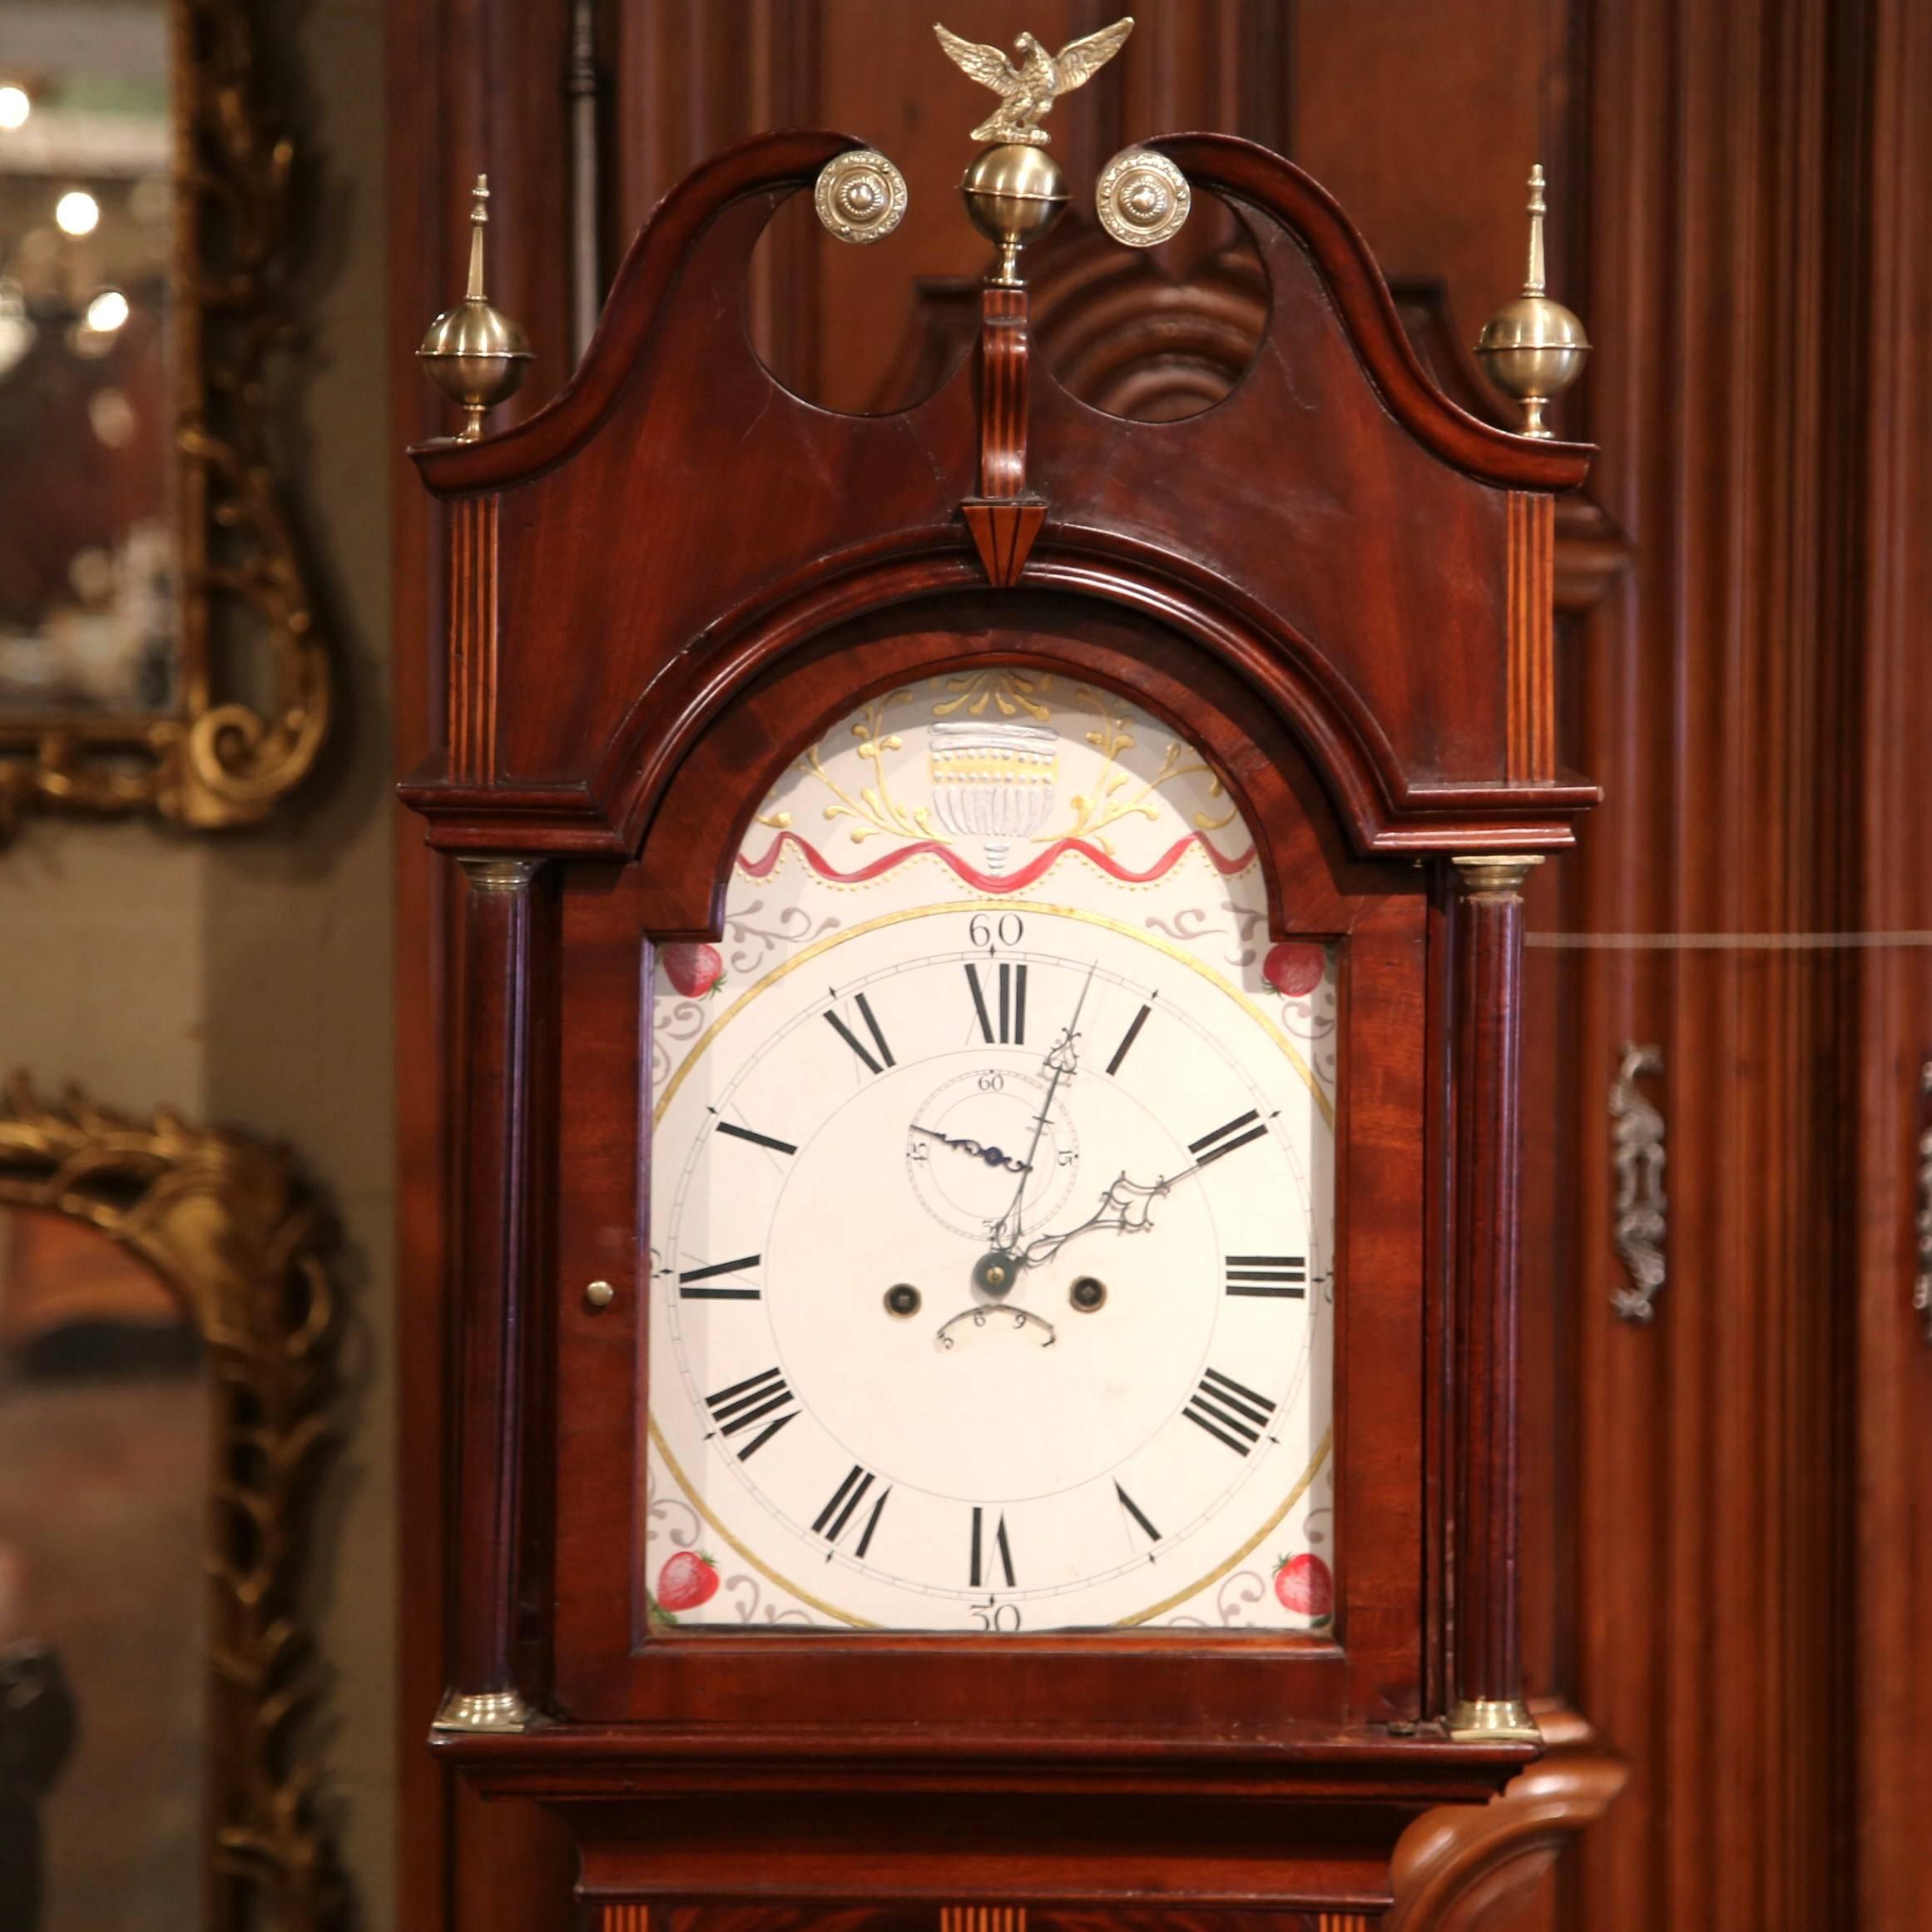 Chippendale 18th Century English Carved Mahogany Tall Case Clock with Brass Mounts